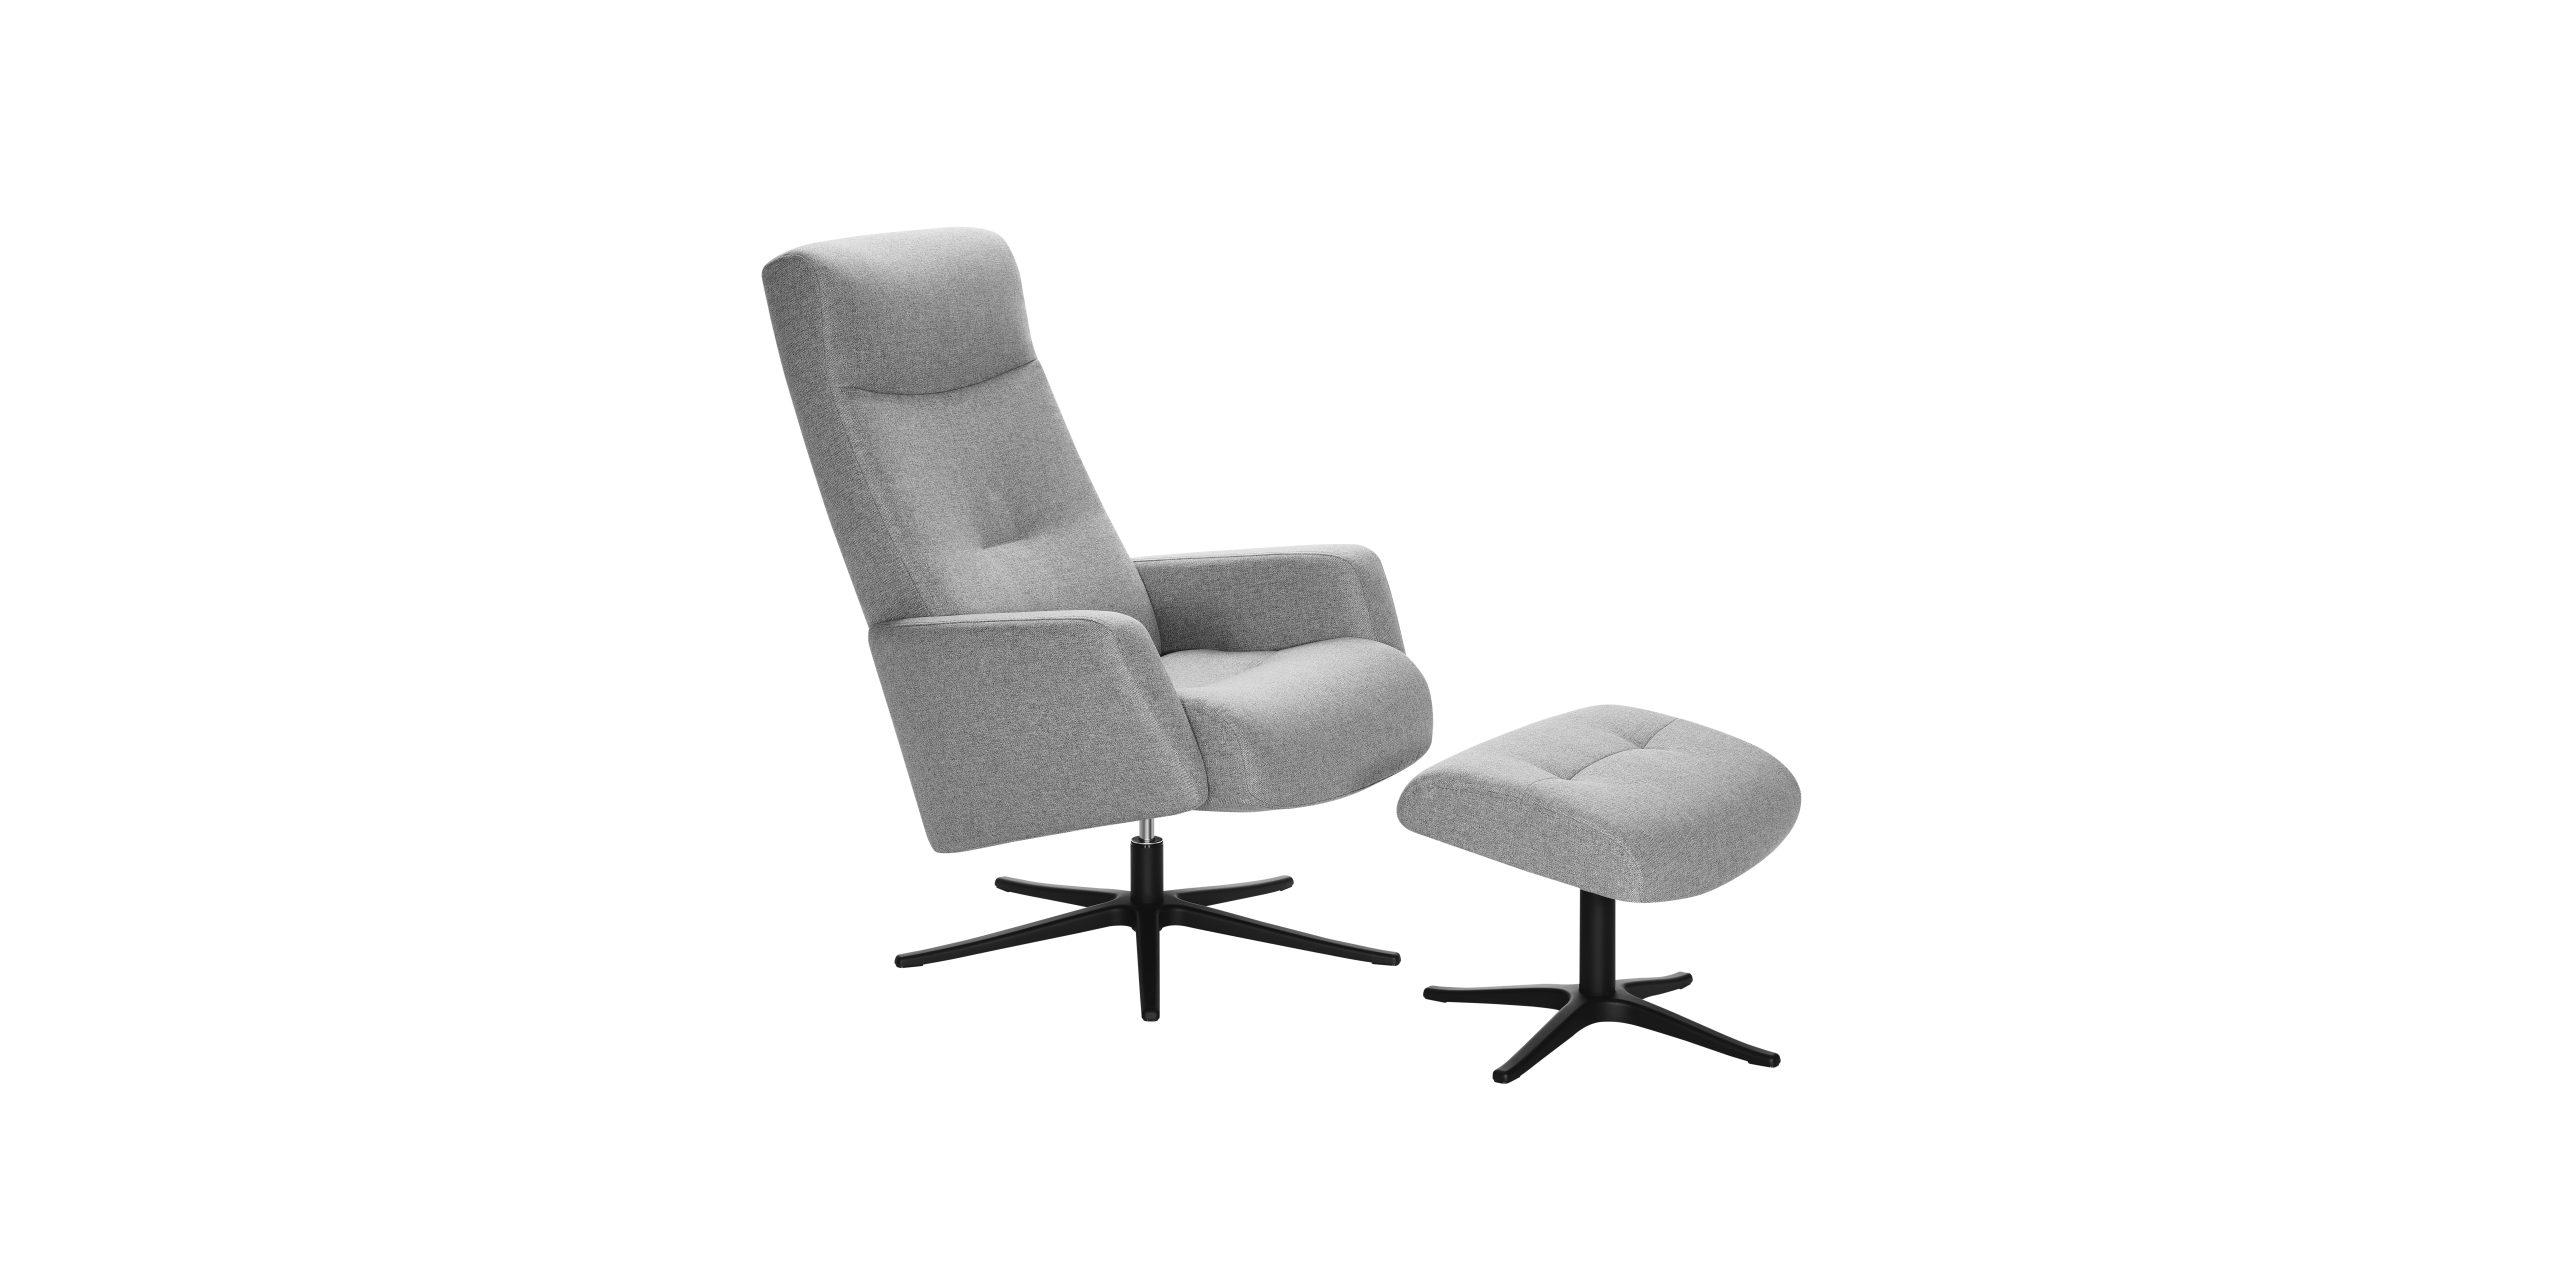 Slider Fauteuil relaxation et repose pieds LEENA 2100 SP (image 2)